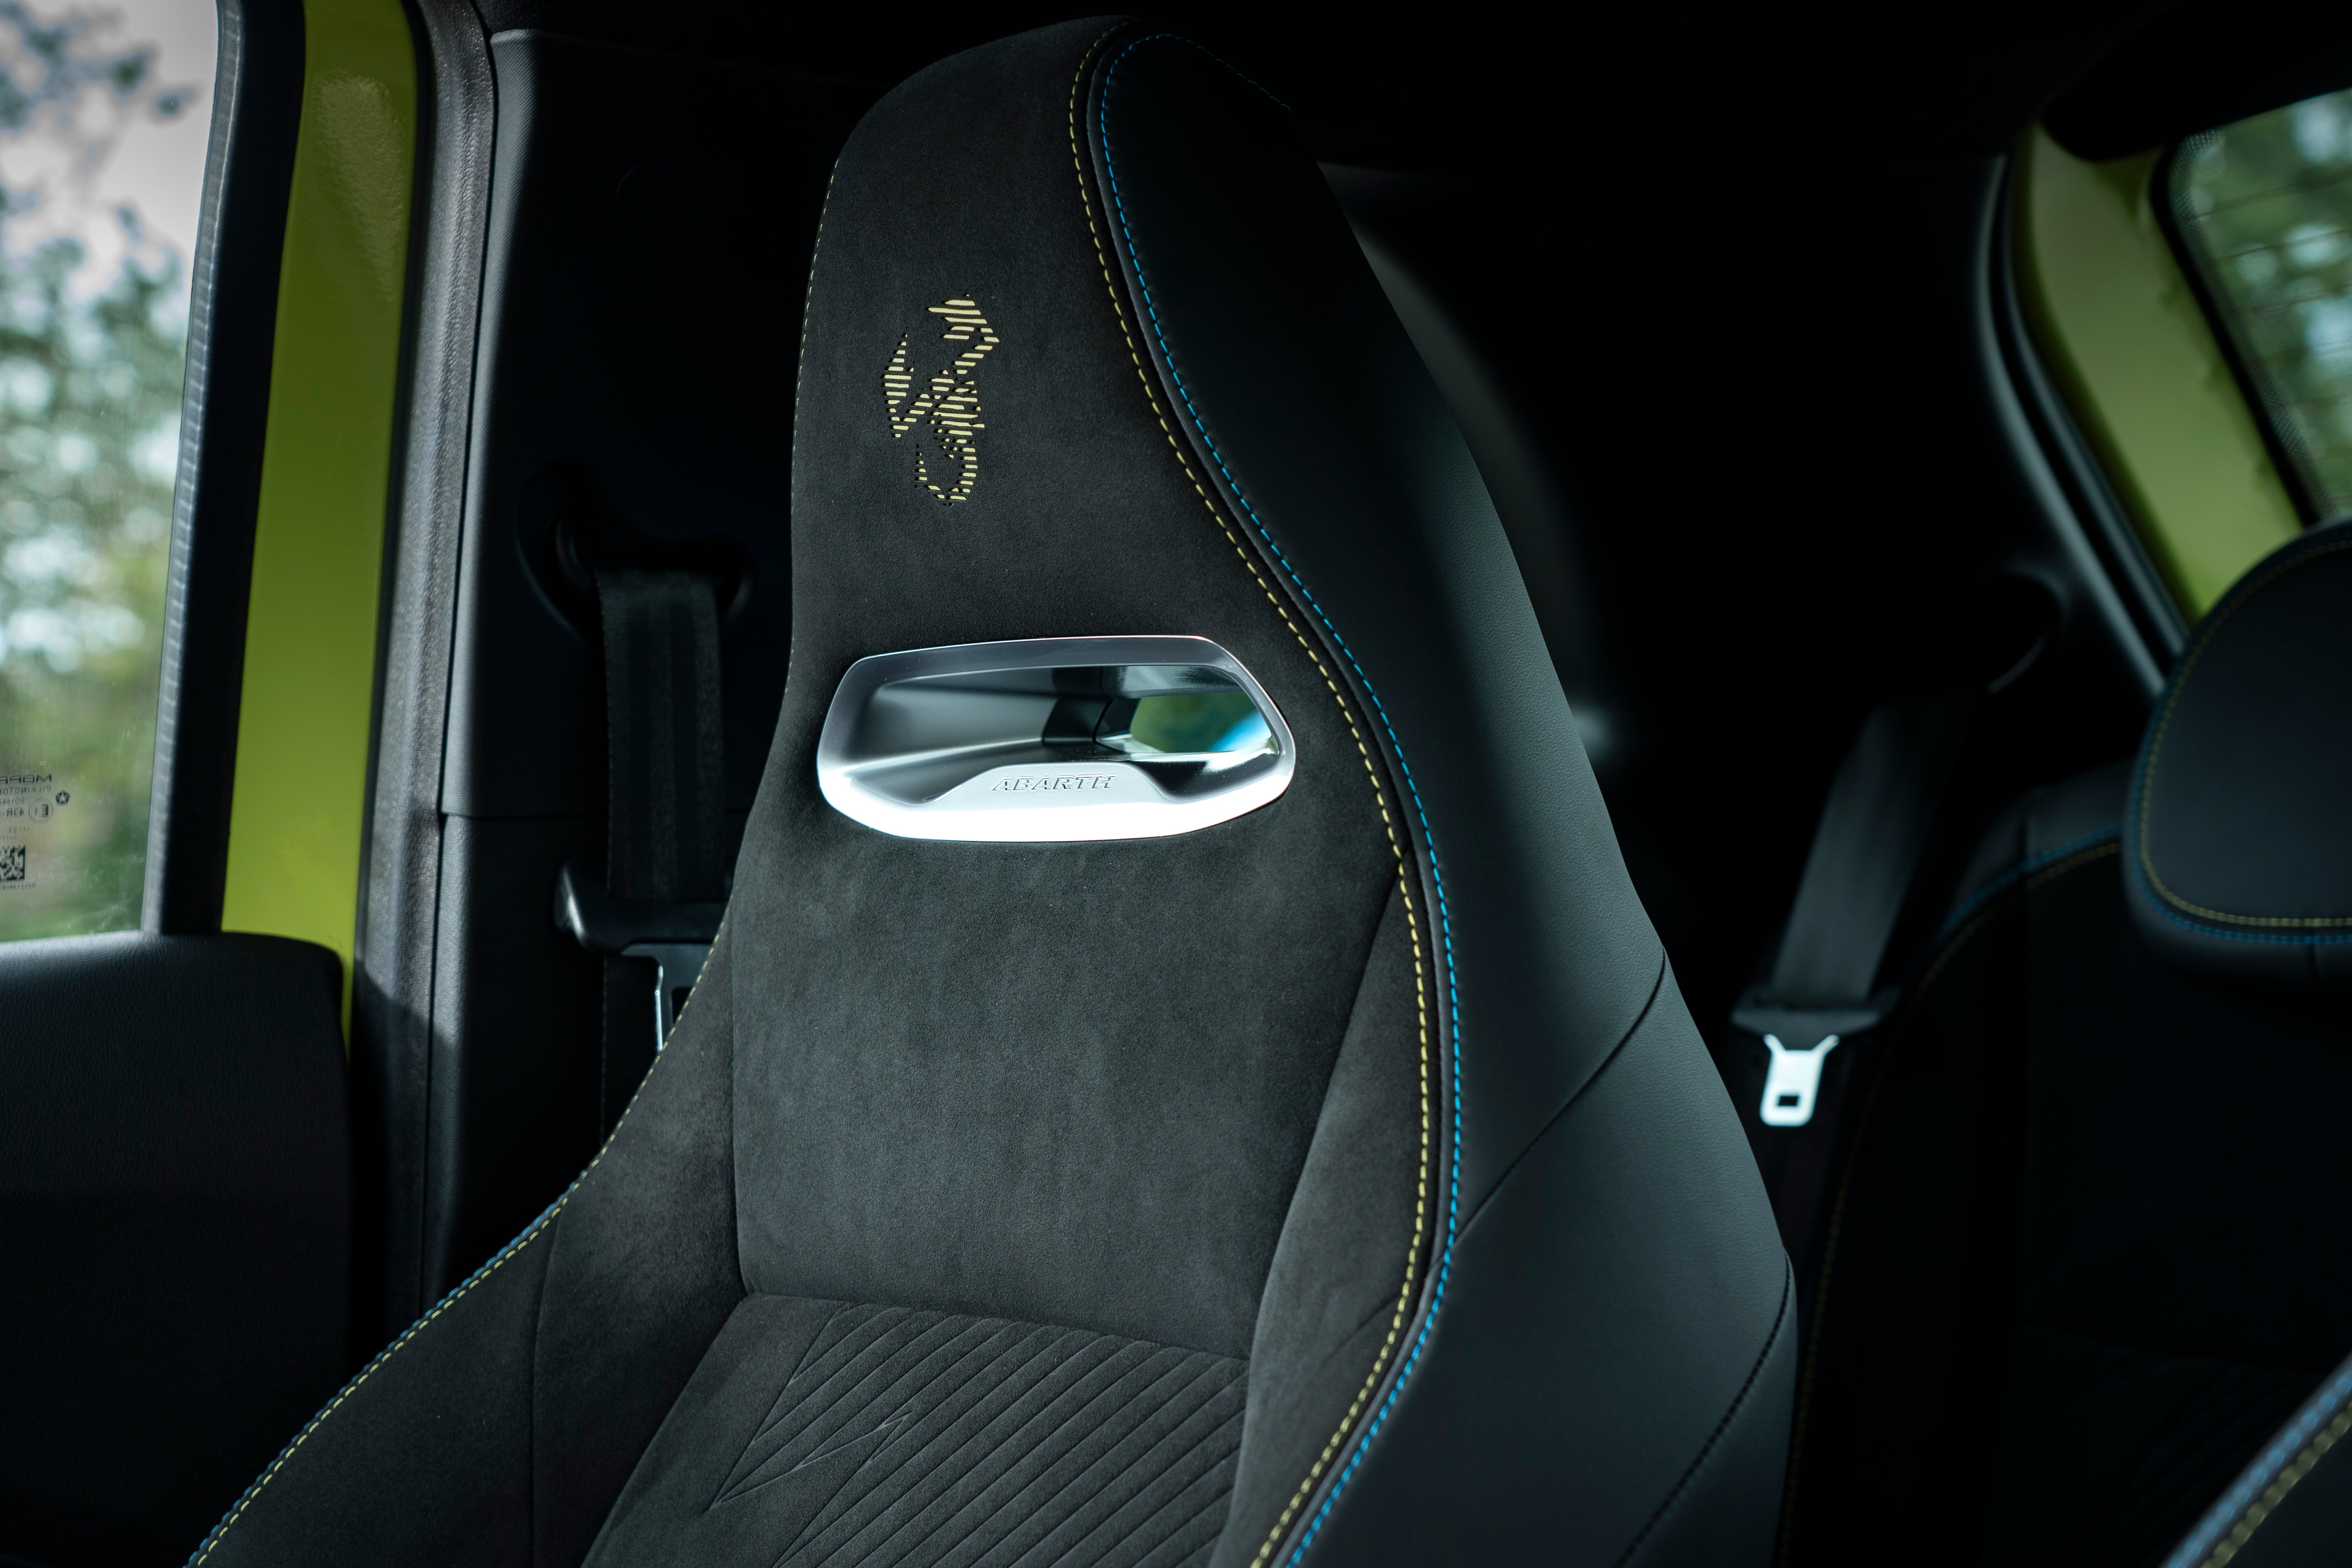 The 500e has Alcantara racing-inspired seats with integrated headrests